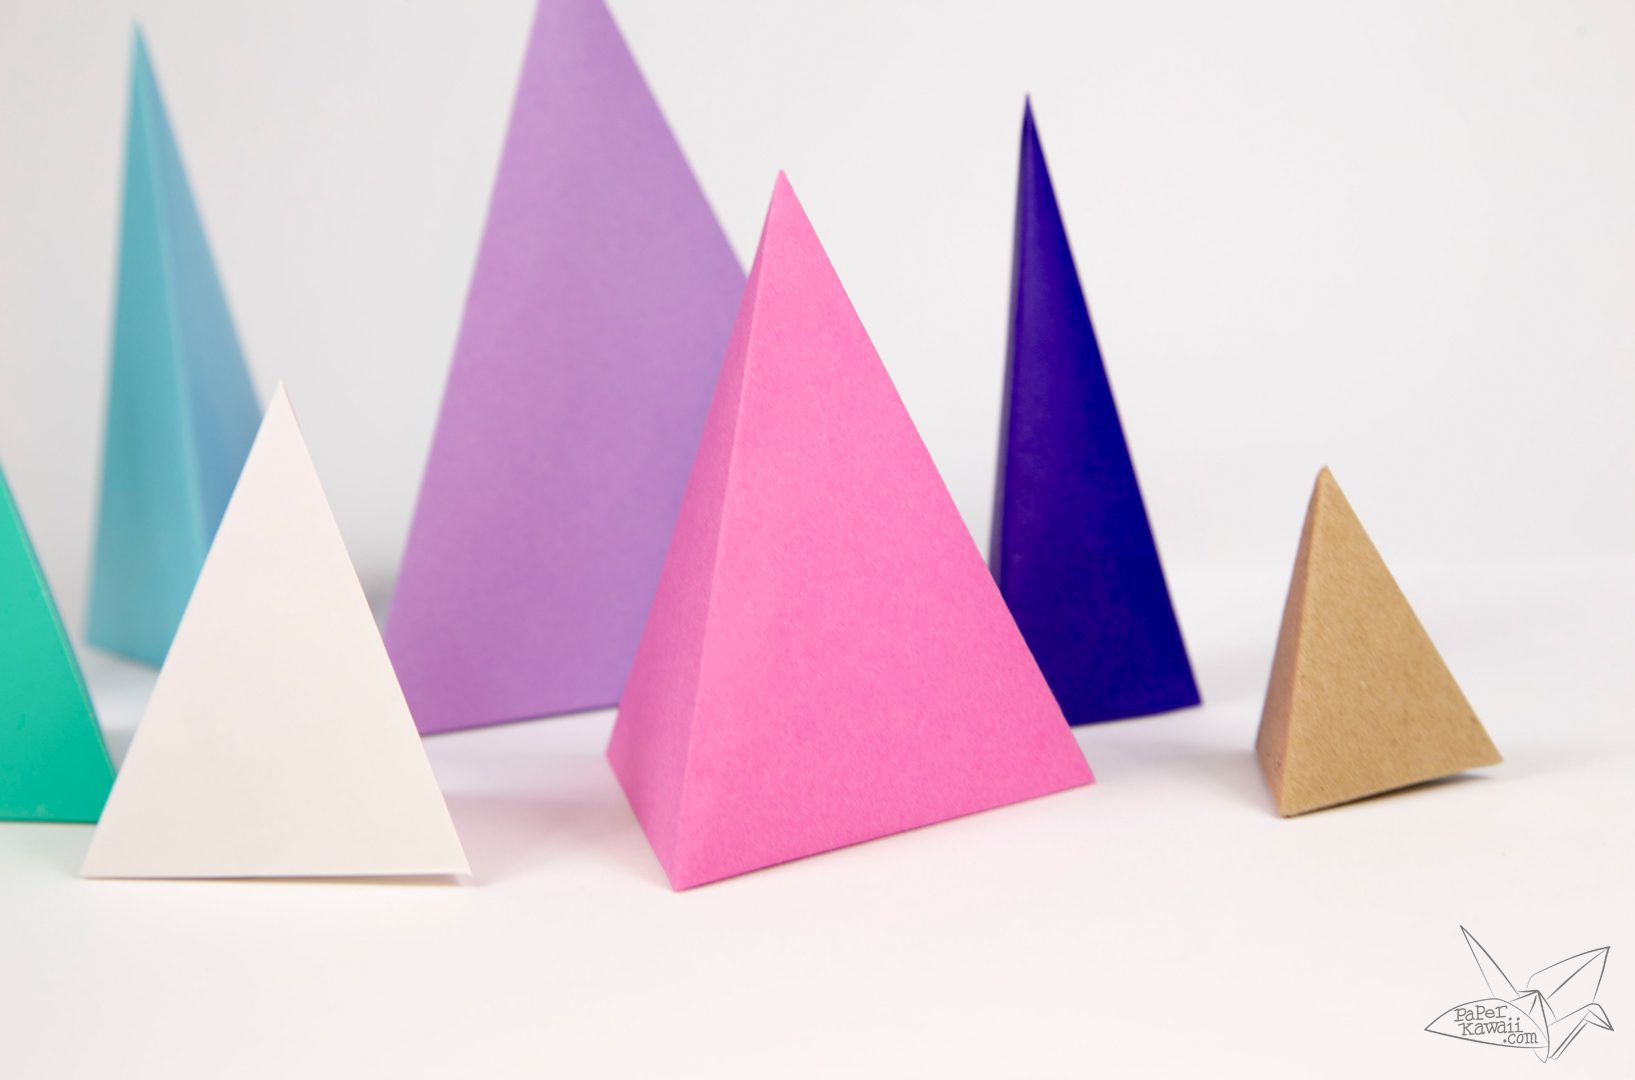 how to make a 3 sided pyramid out of paper